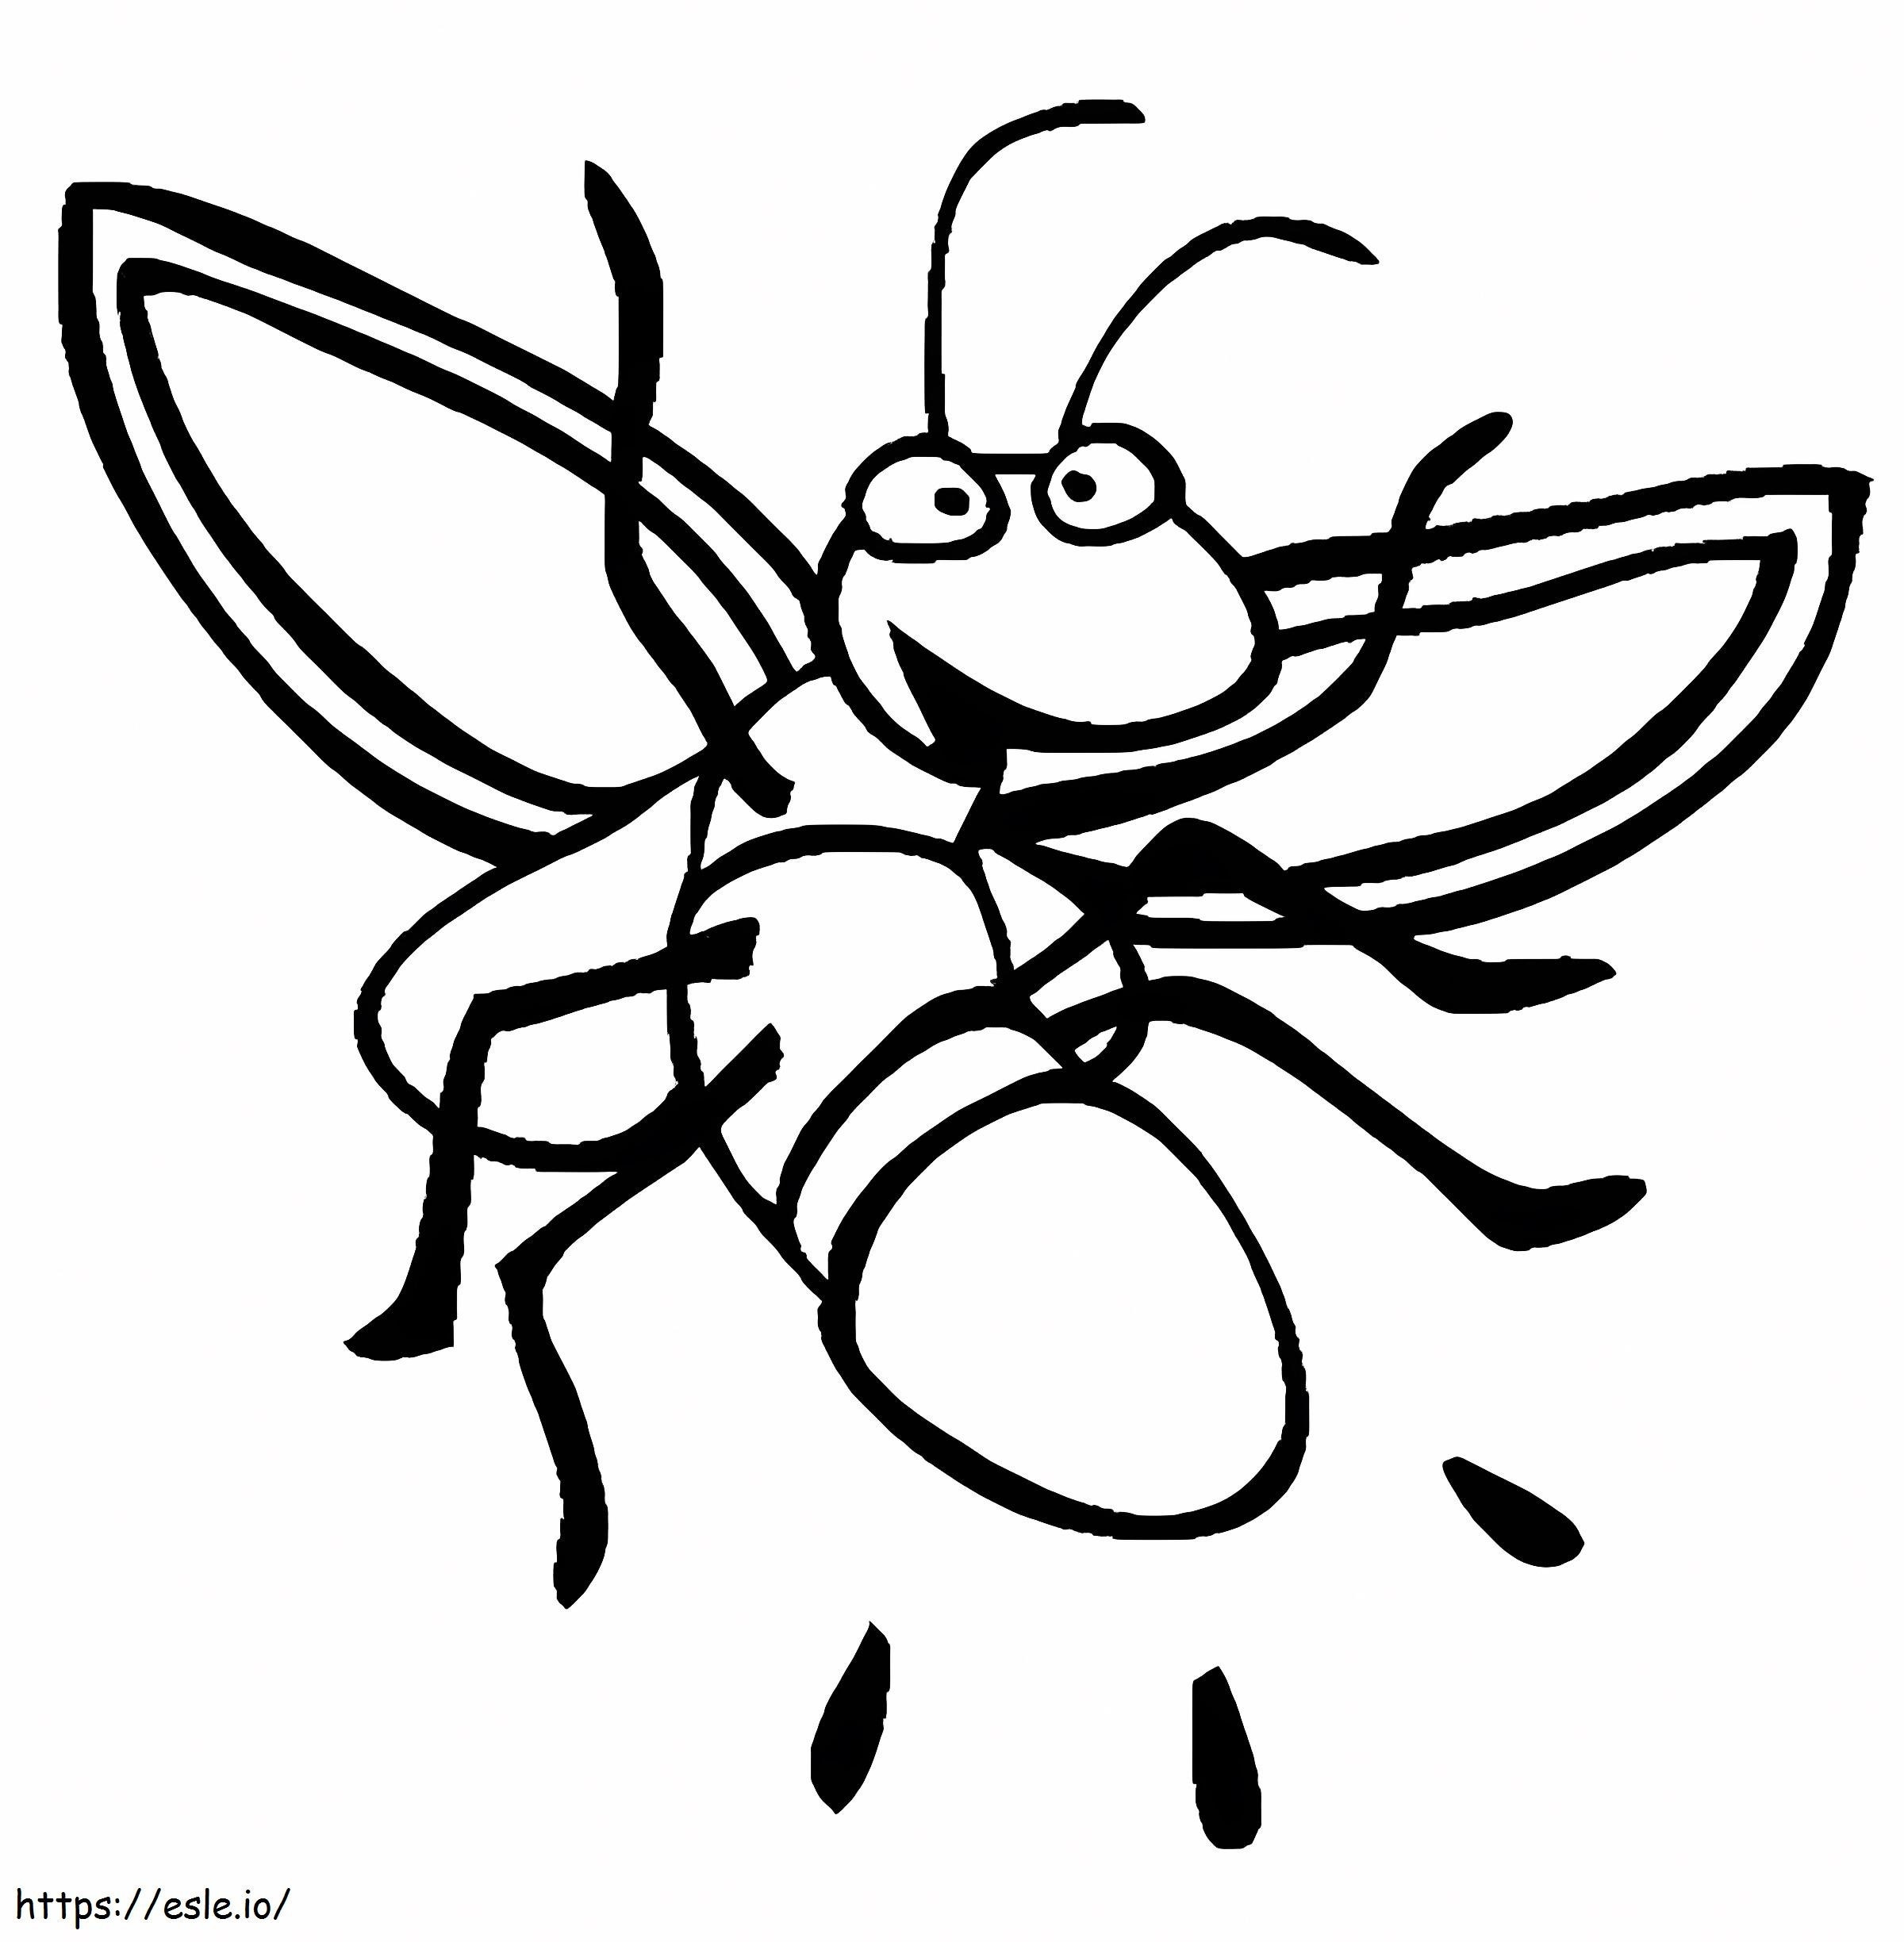 Funny Firefly coloring page